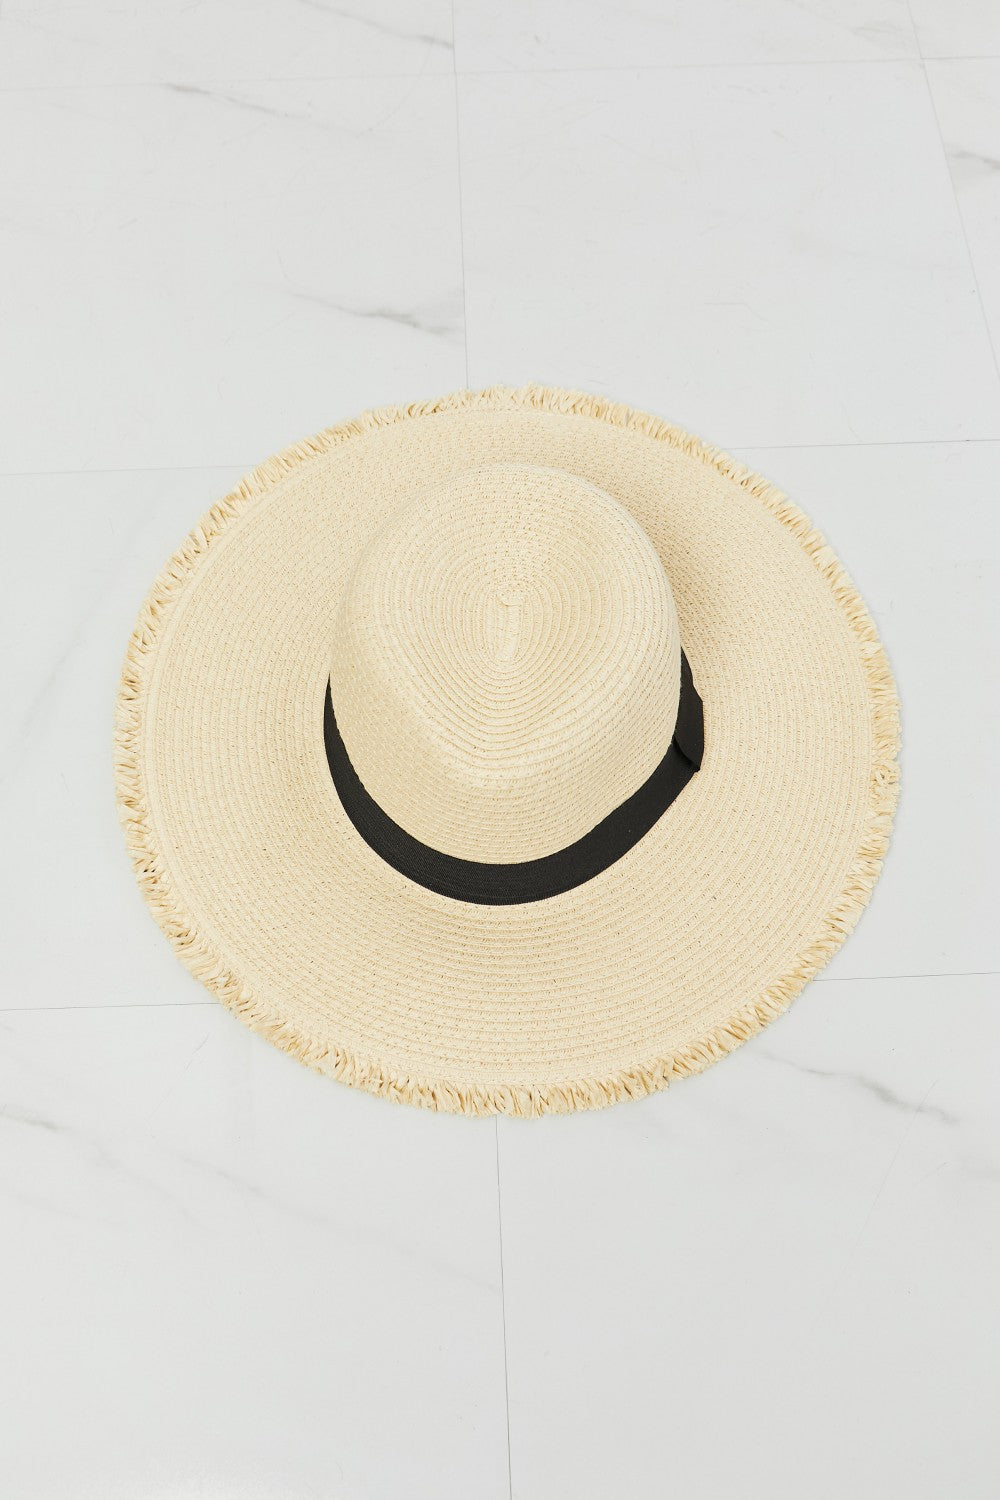 Fame Time For The Sun Straw Hat Print on any thing USA/STOD clothes